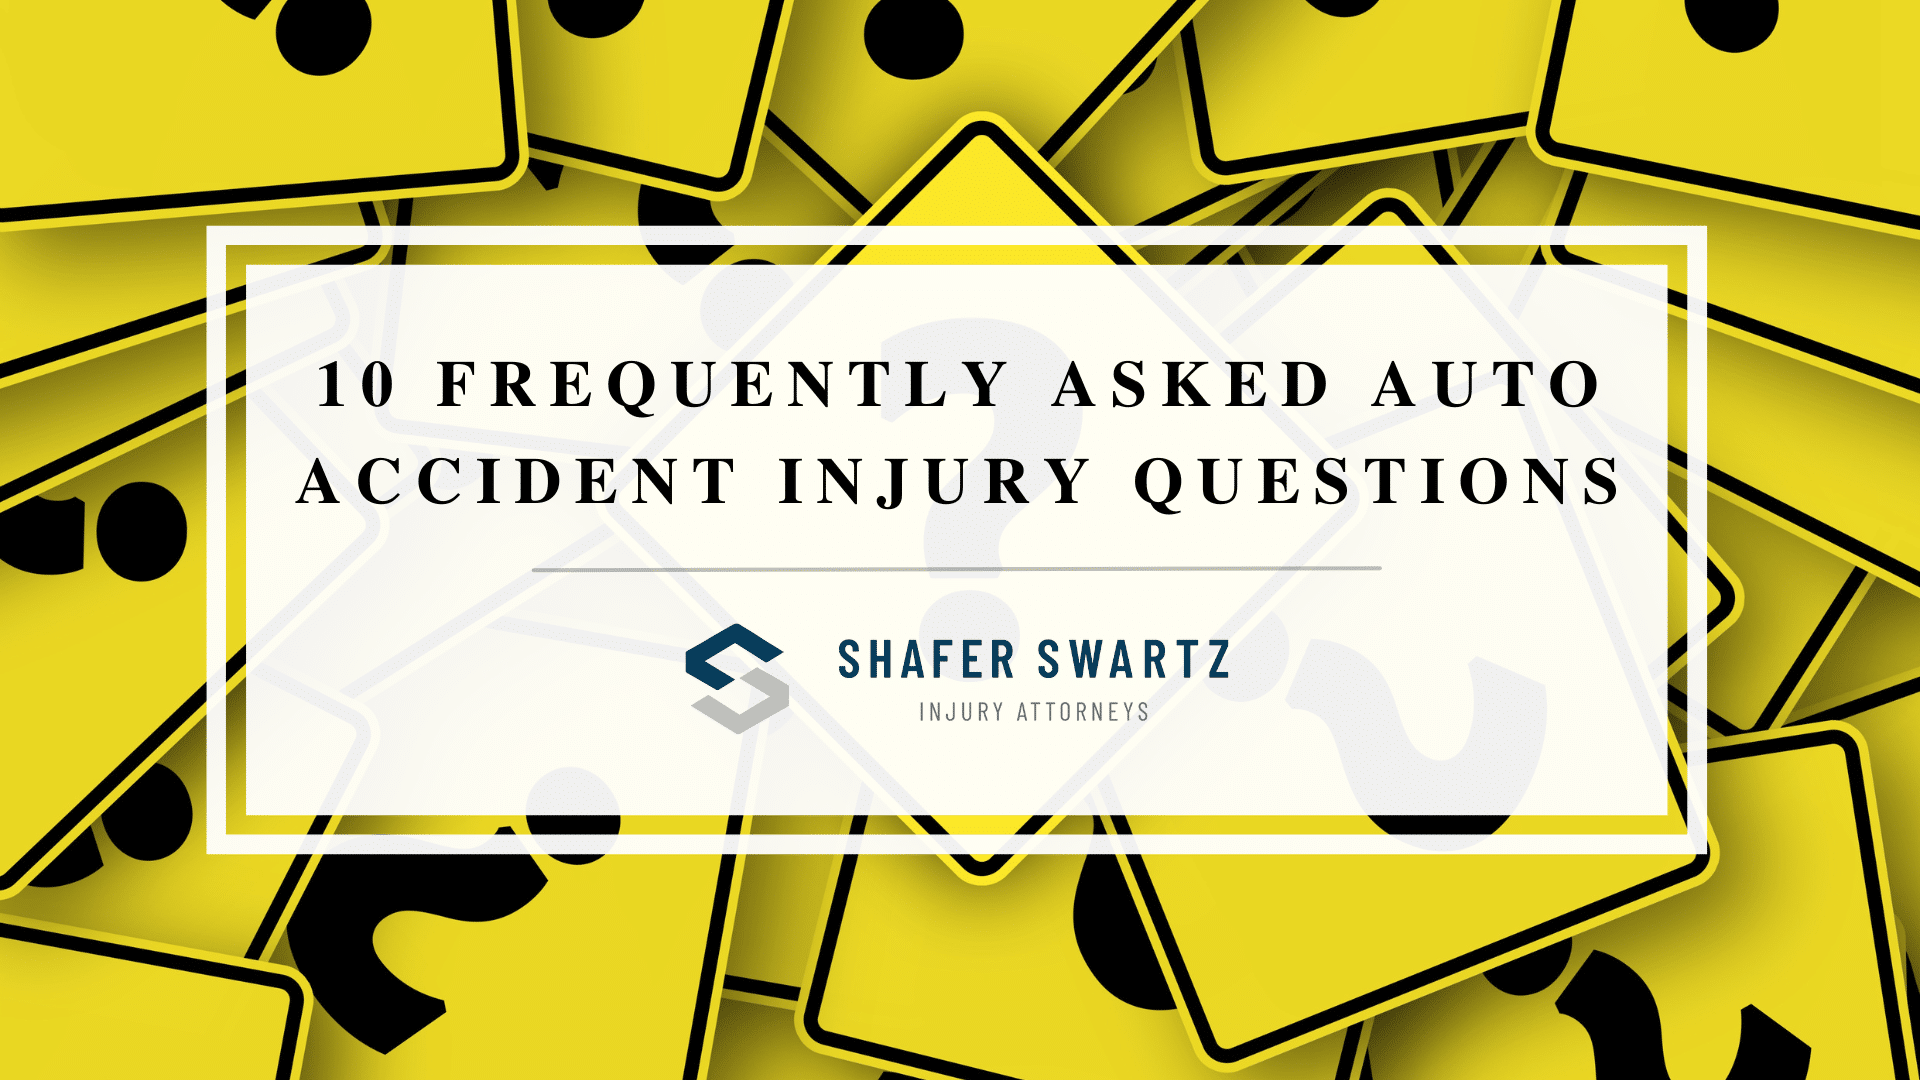 10 Frequently Asked Auto Accident Injury Questions